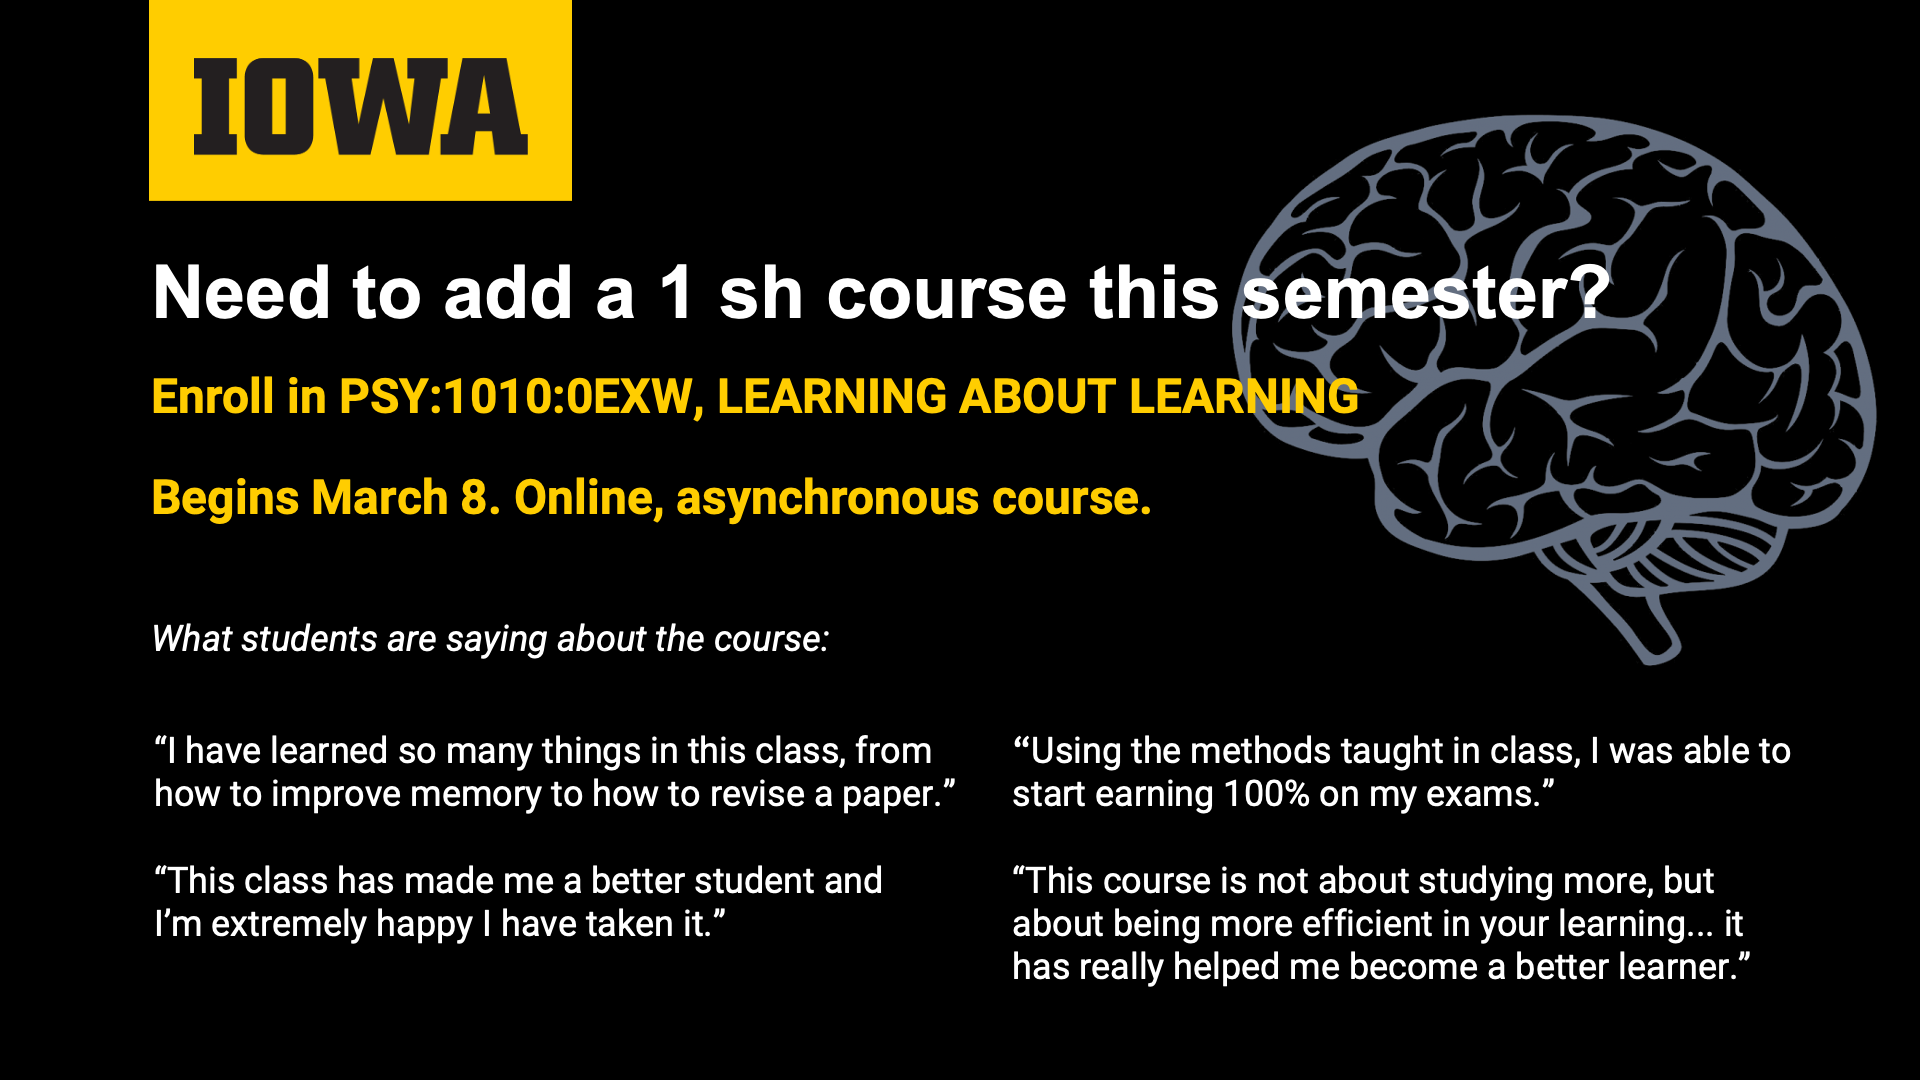 Need to add a 1 semester hour course this semester? Enroll in PSY 1010:0EXW – Learning about Learning